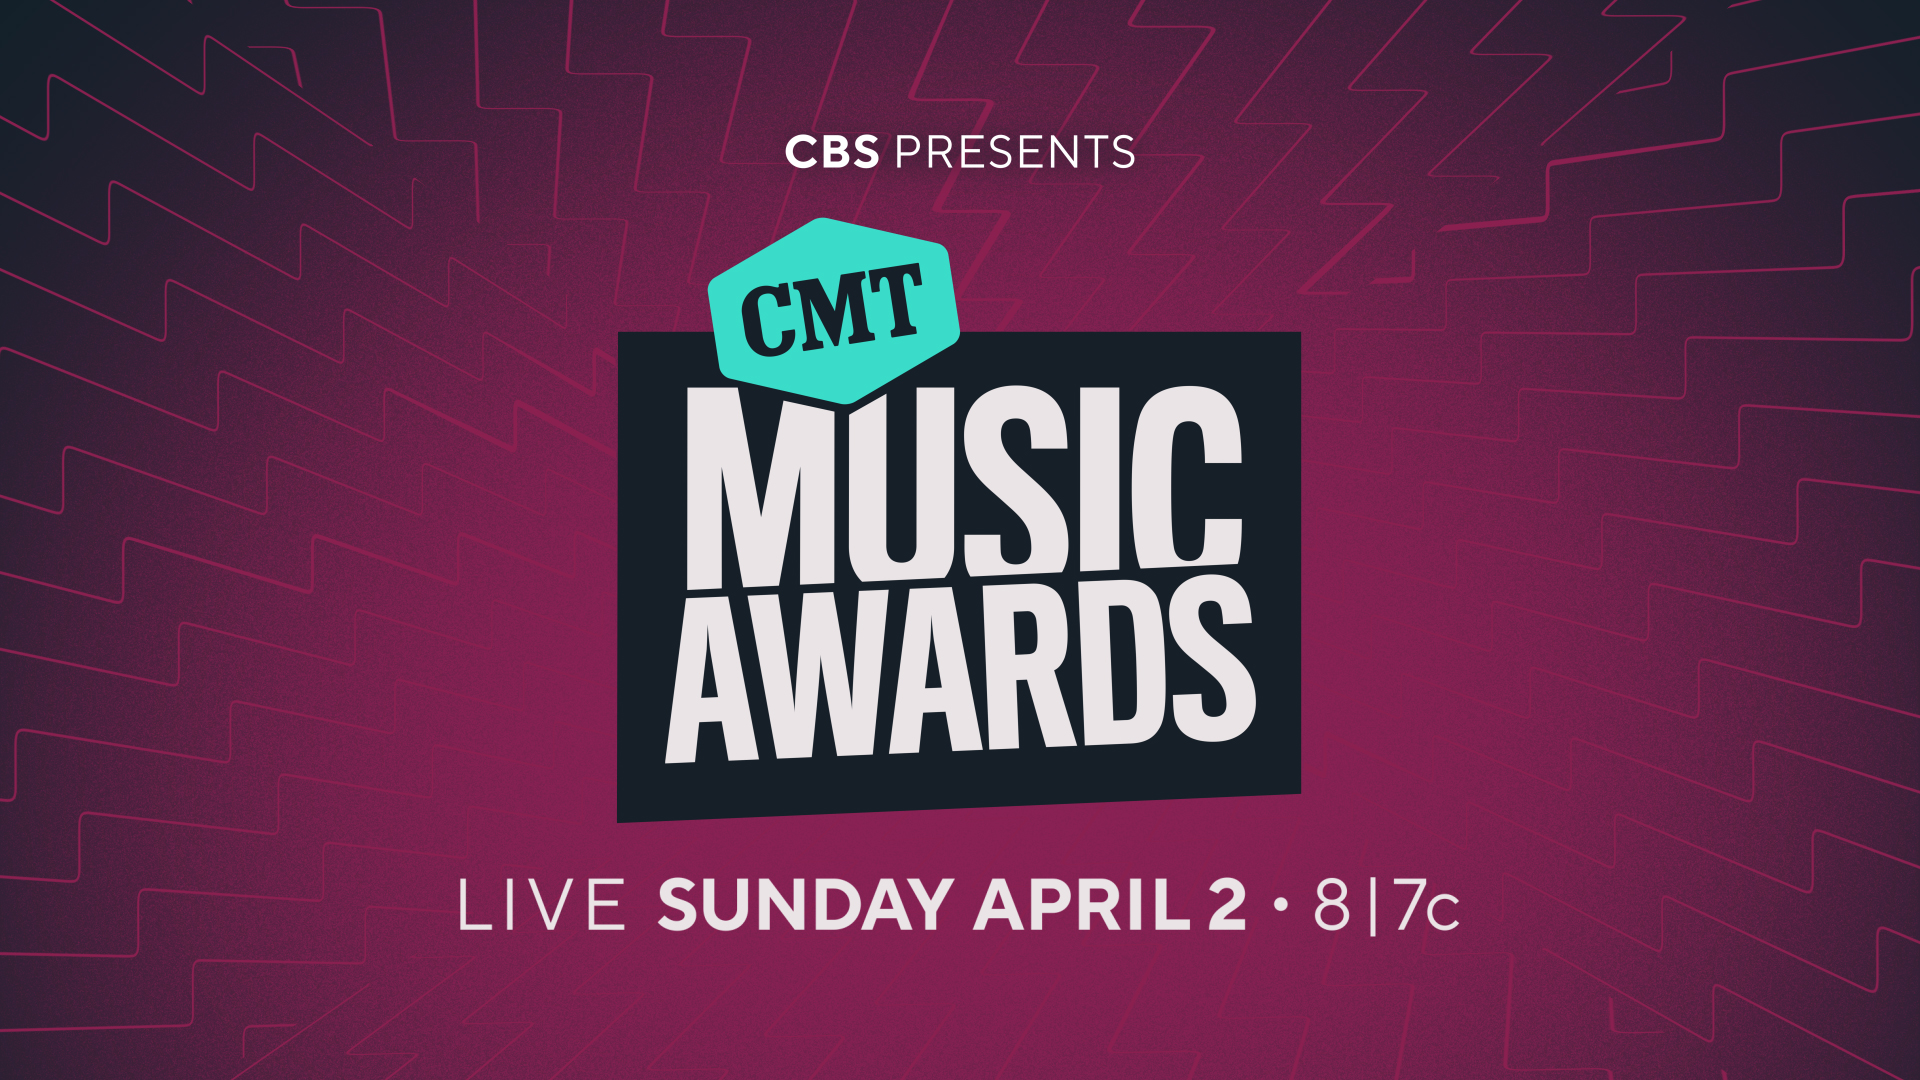 Cheat Sheet: Here’s Everything You Need To Know About The 2023 CMT Music Awards 